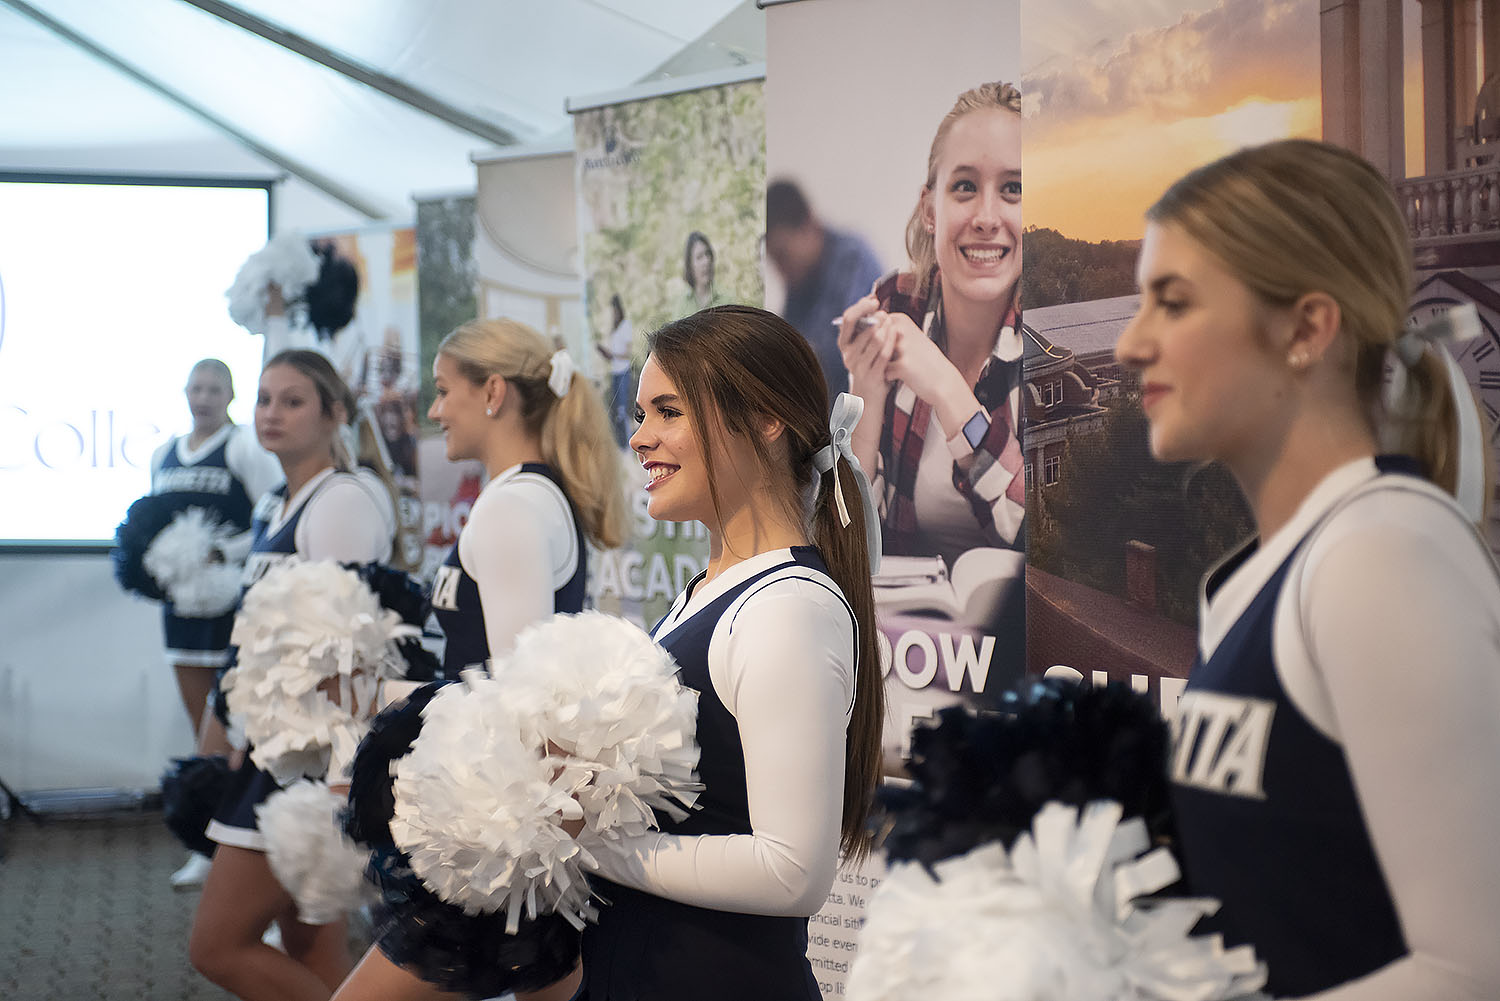 Cheerleaders during the Campaign announcement event at Homecoming 2021